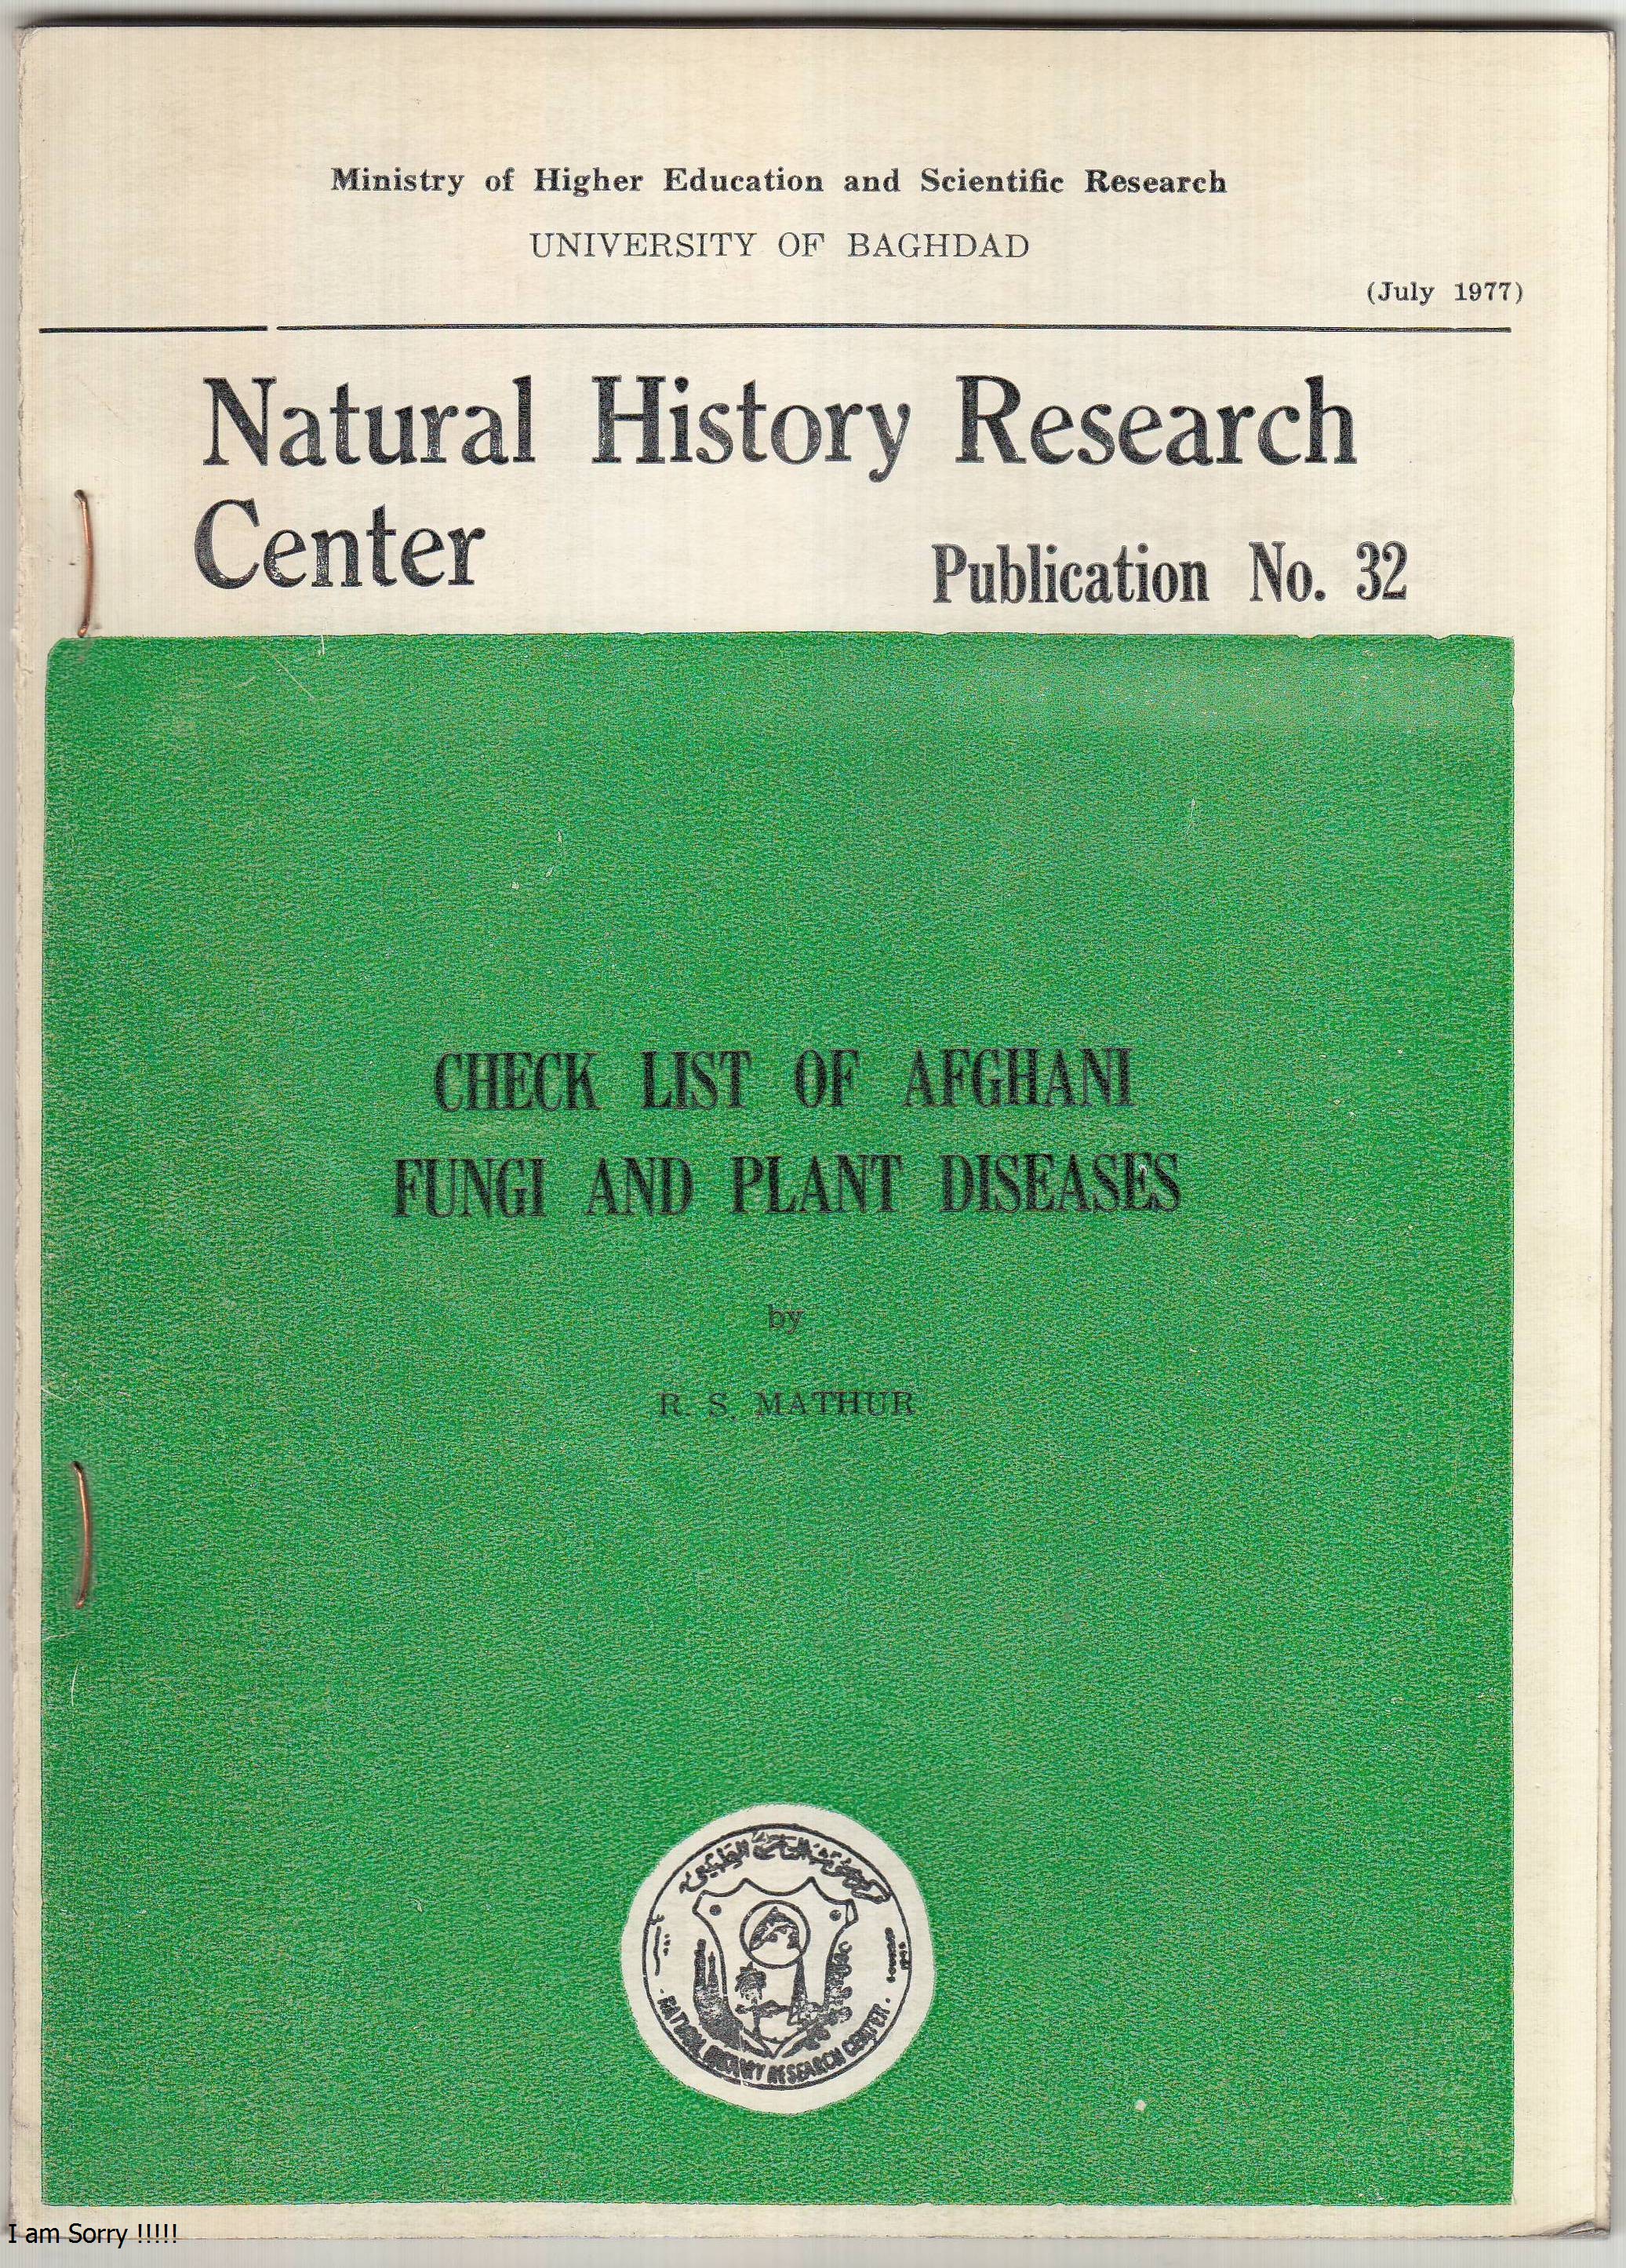 					View No. 32 (1977): Check List of Afghani Fungi And Plant Disease by R.S. MATHUR, Iraq Nat.Hist. Mus, Baghdad, Iraq  
				